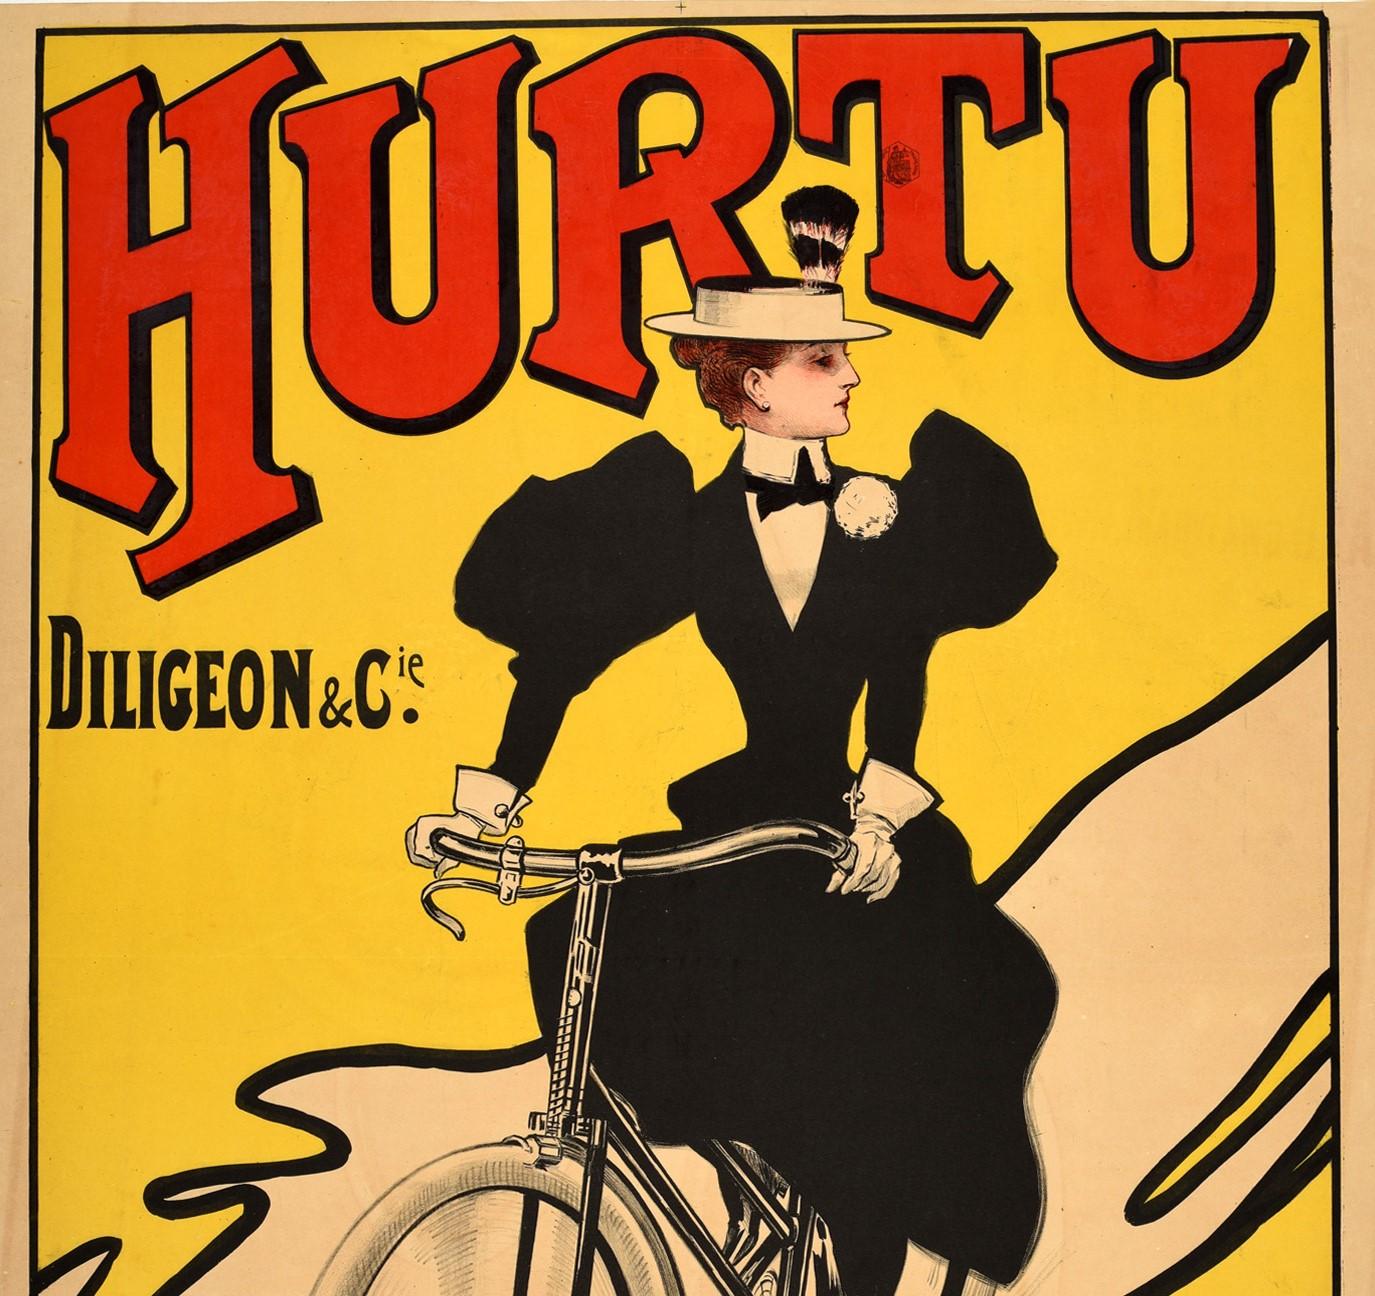 Original antique advertising poster for Hurtu bicycles featuring a great illustration of a fashionably dressed lady wearing a black dress and feathered hat riding a bike against a yellow background below the stylised lettering in red with the black